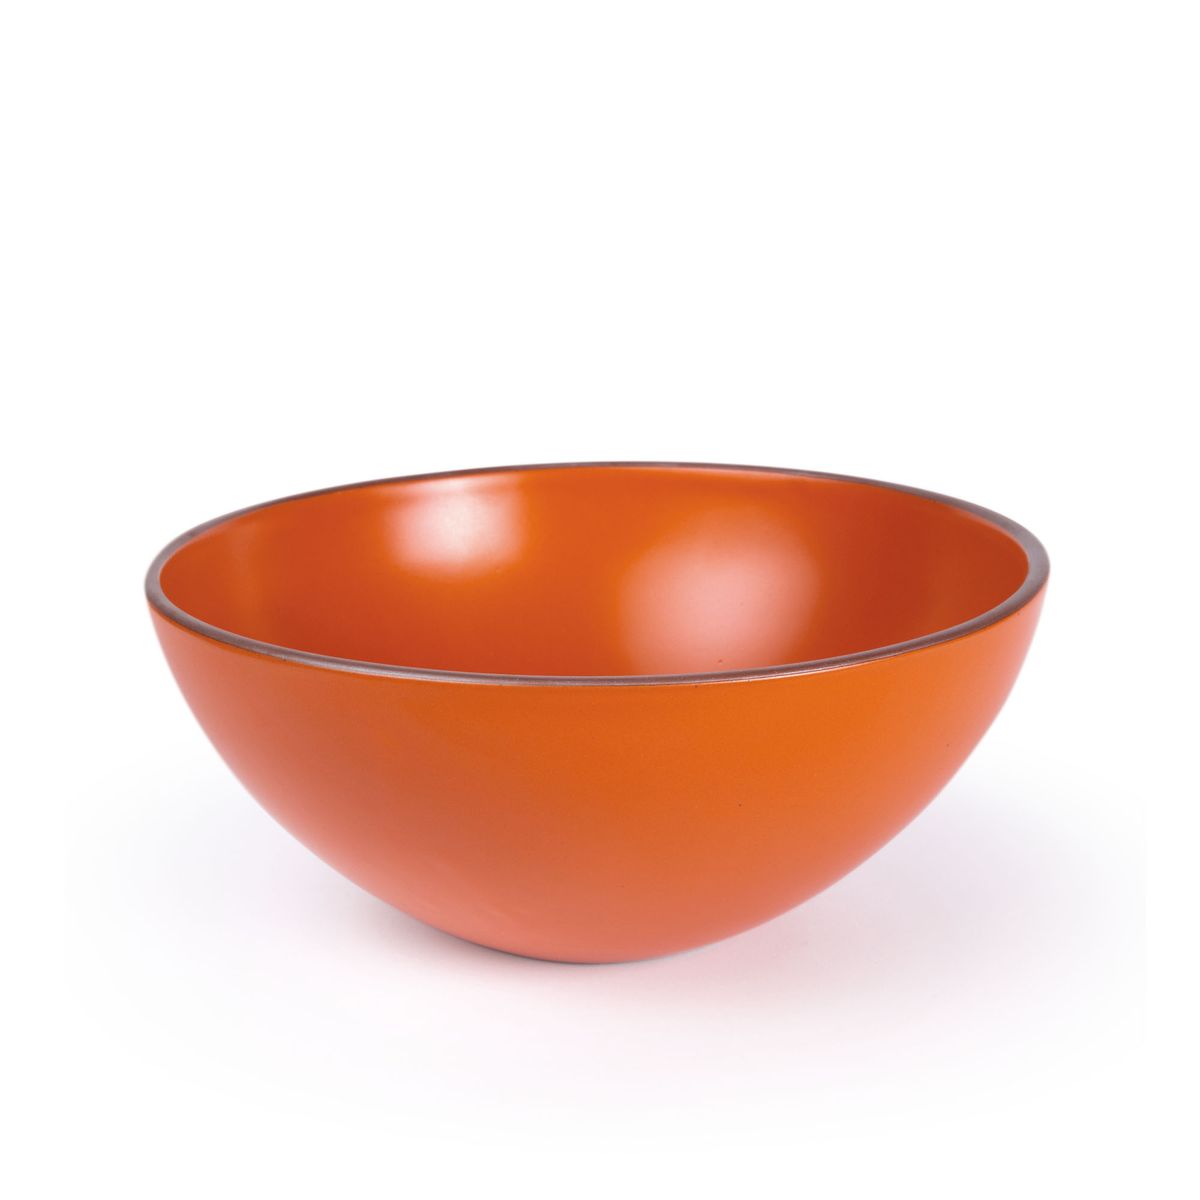 A large ceramic mixing bowl in a bold orange color featuring iron speckles and an unglazed rim